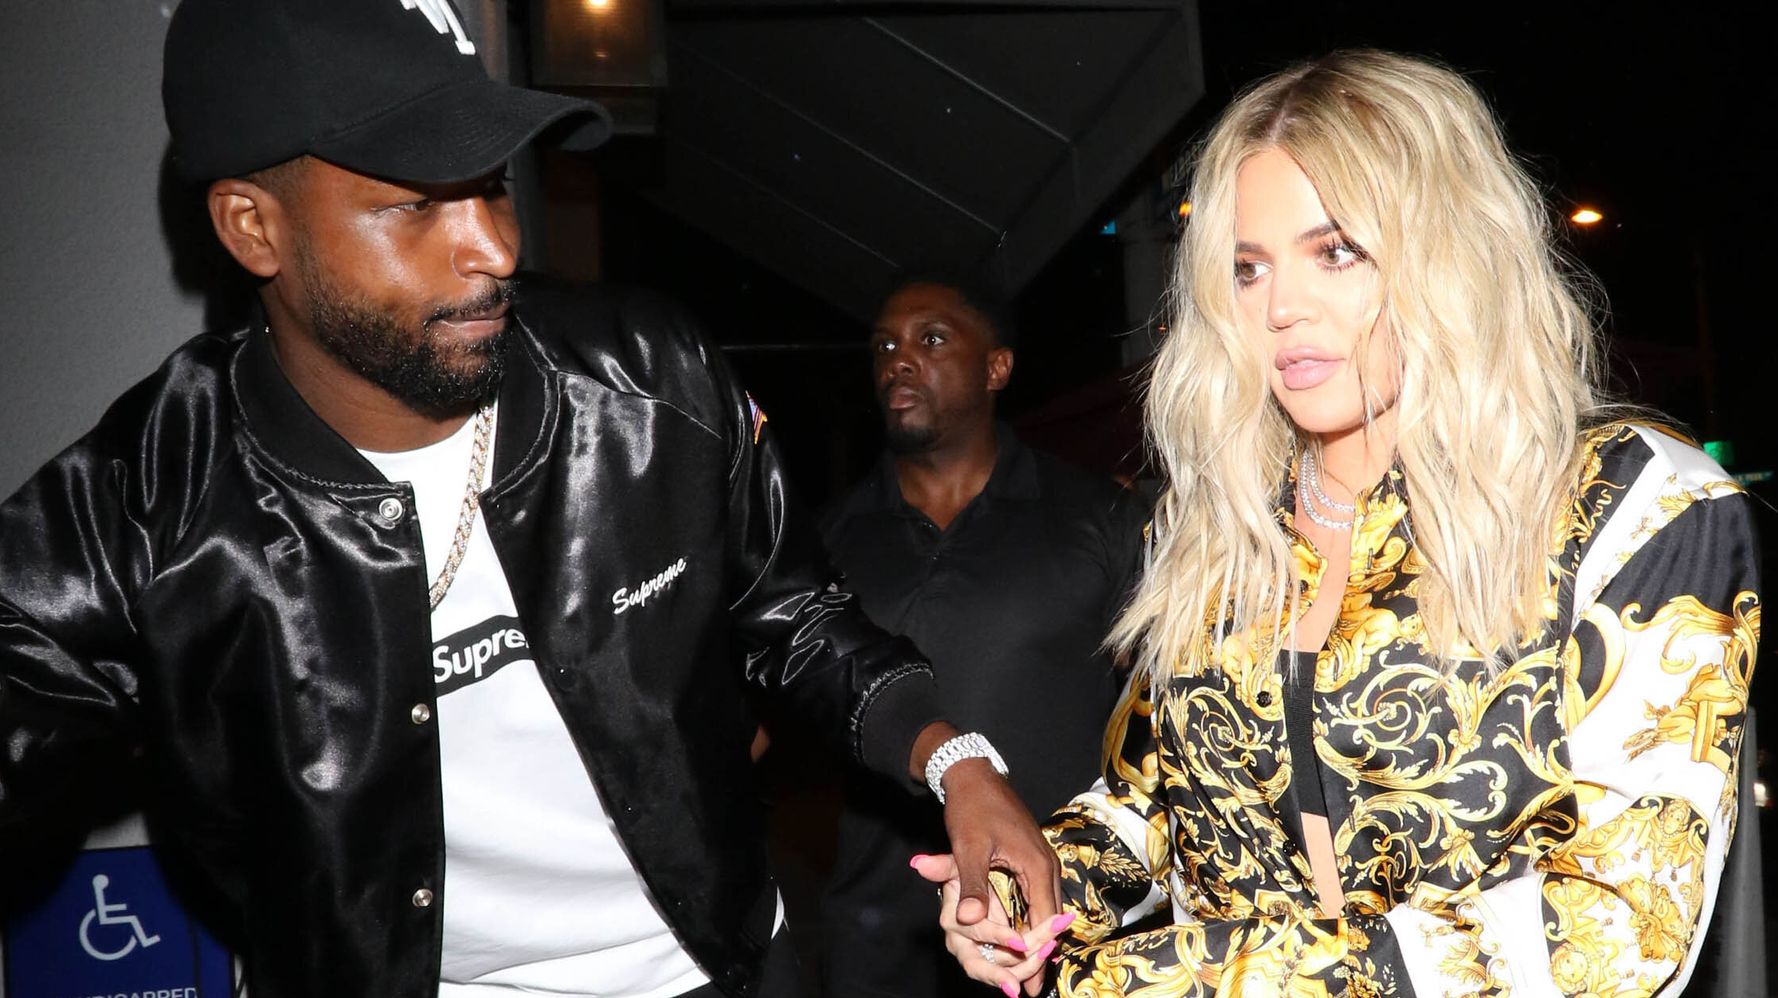 Khloé Kardashian And Tristan Thompson Are Majorly Pressed About Reconciliation Rumors